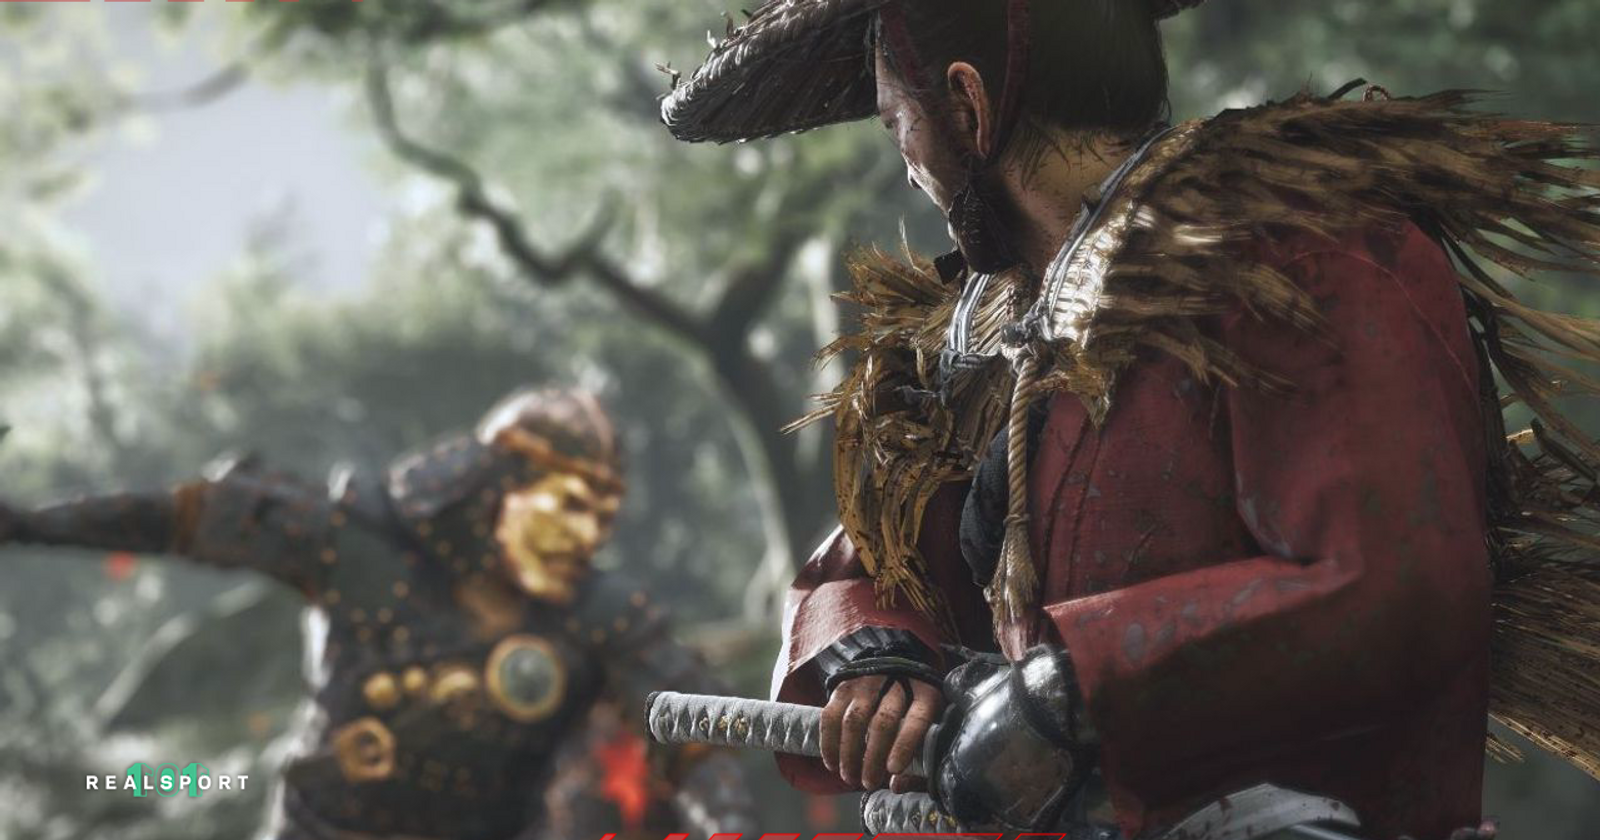 Ghost of Tsushima: Director's Cut comes to PS5 and PS4 on August 20